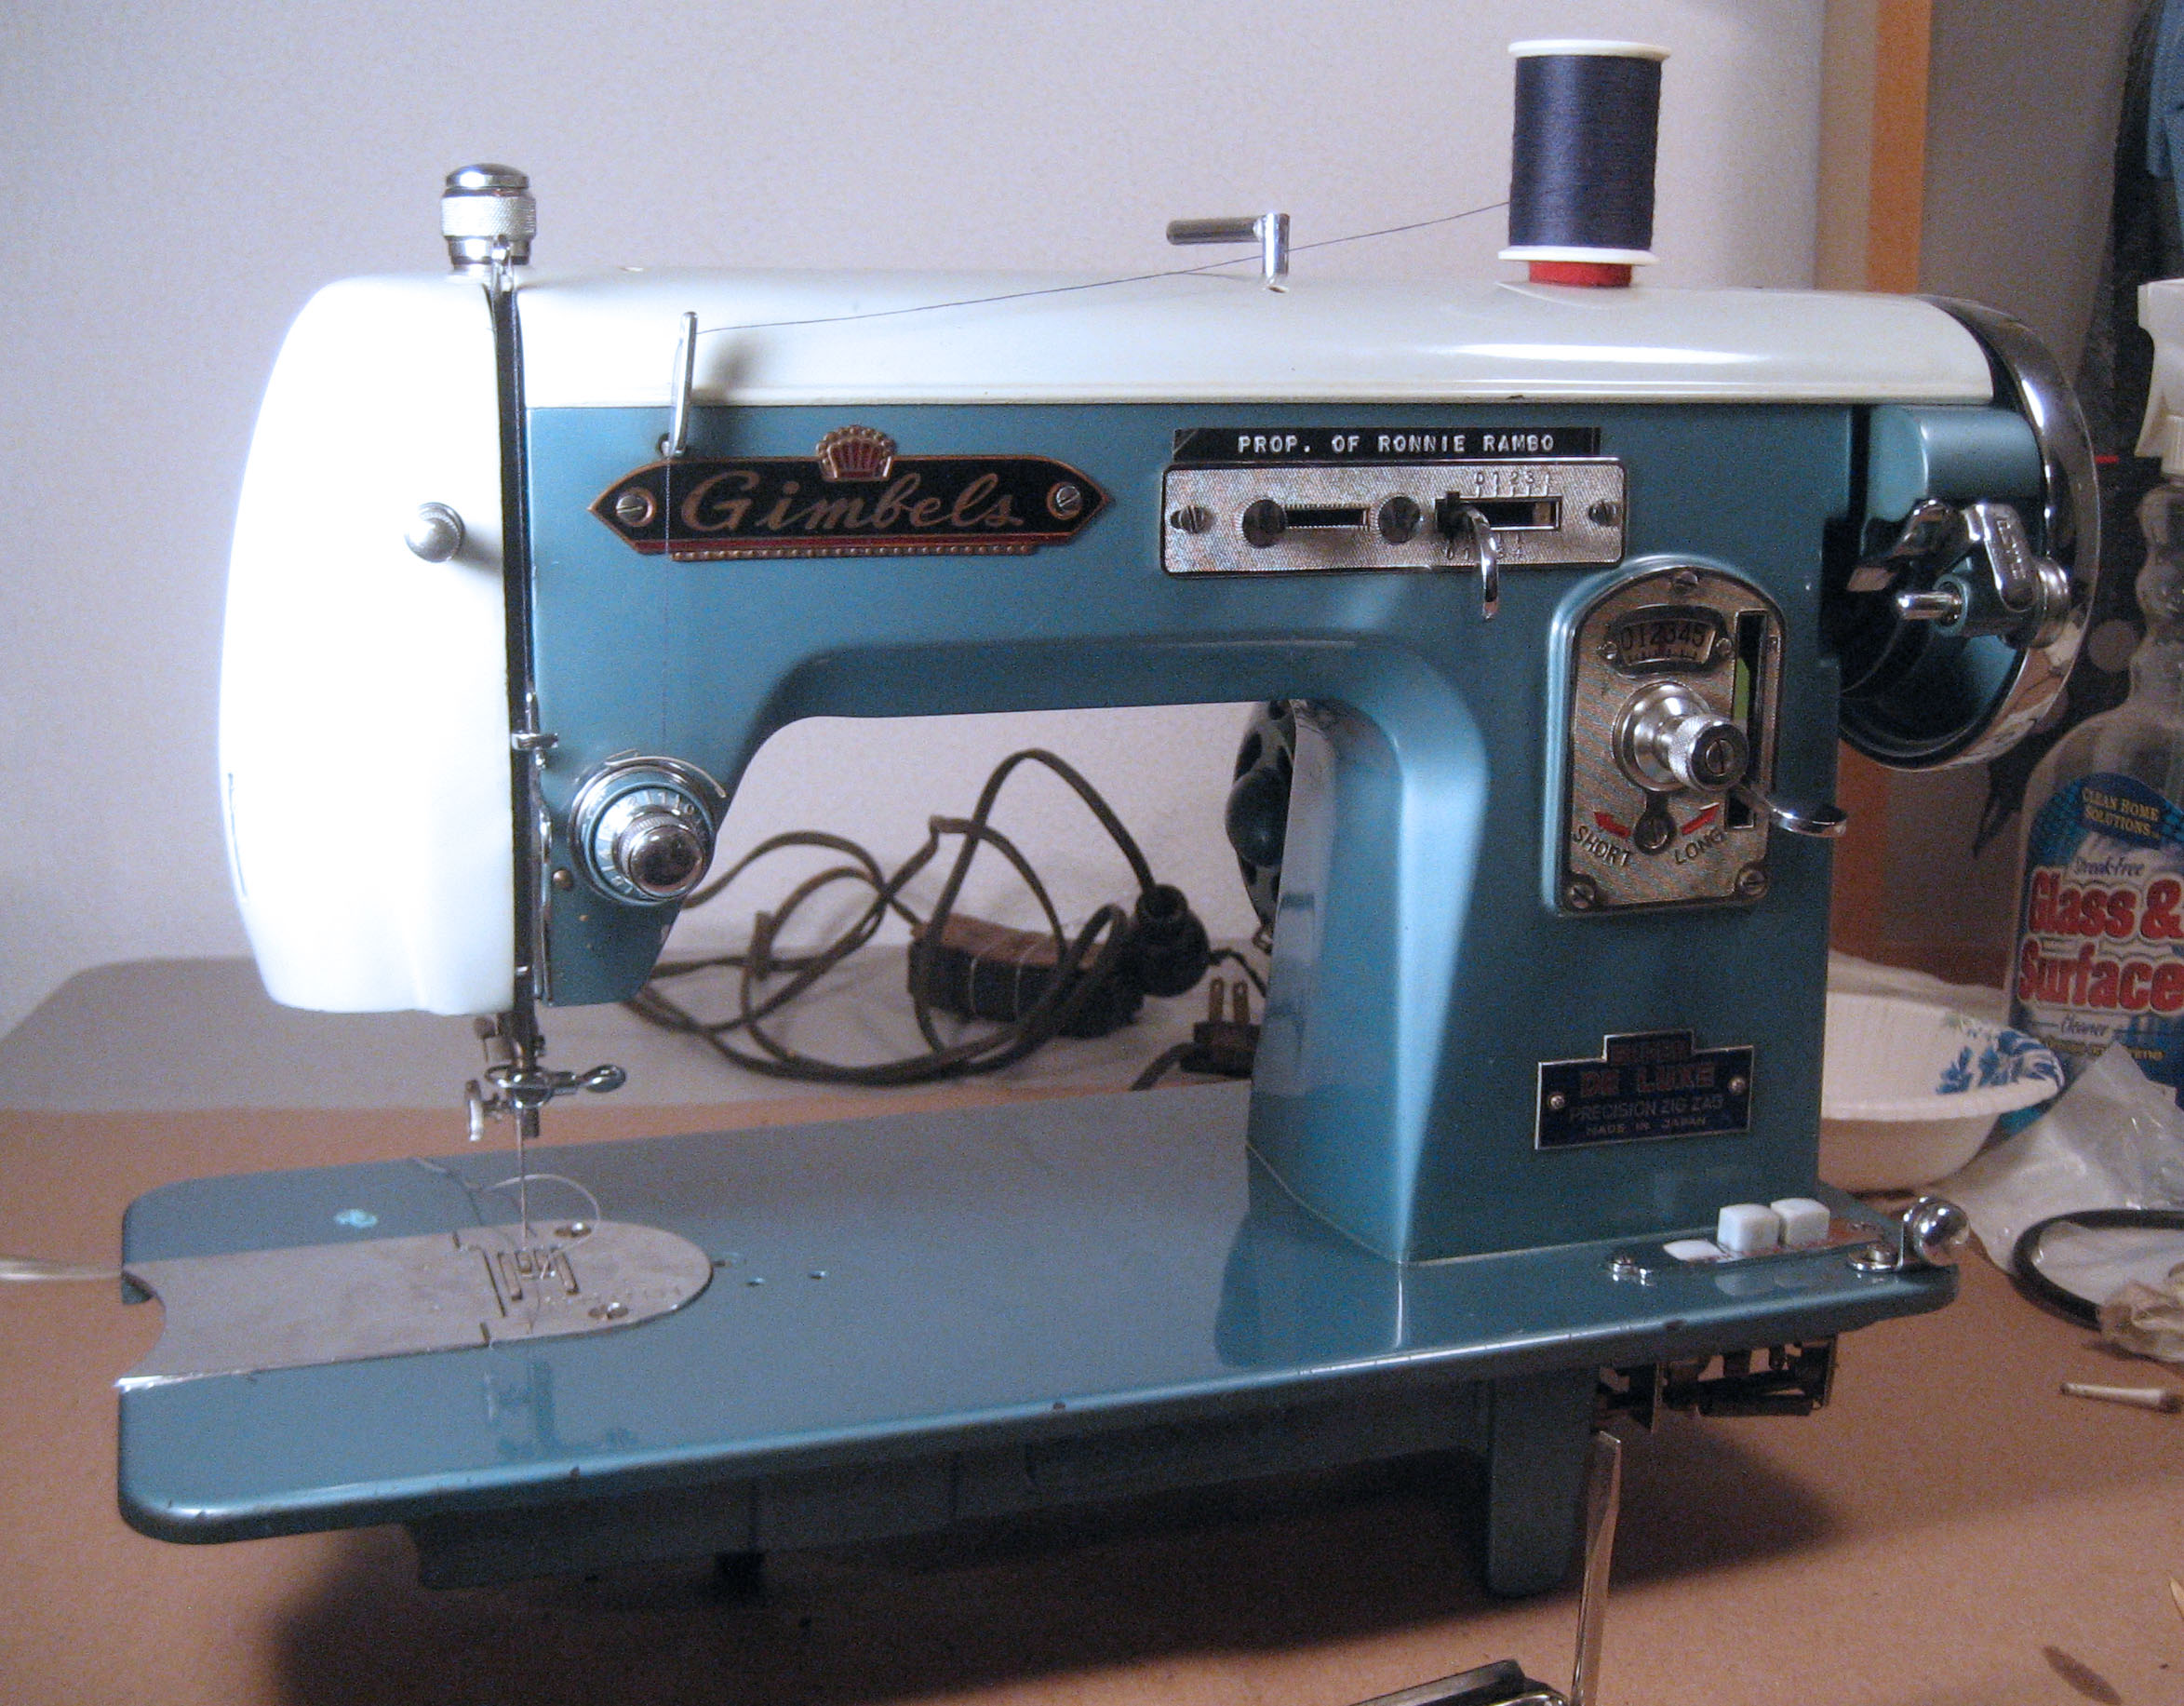 ...who is a 1960's teal and cream sewing machine.